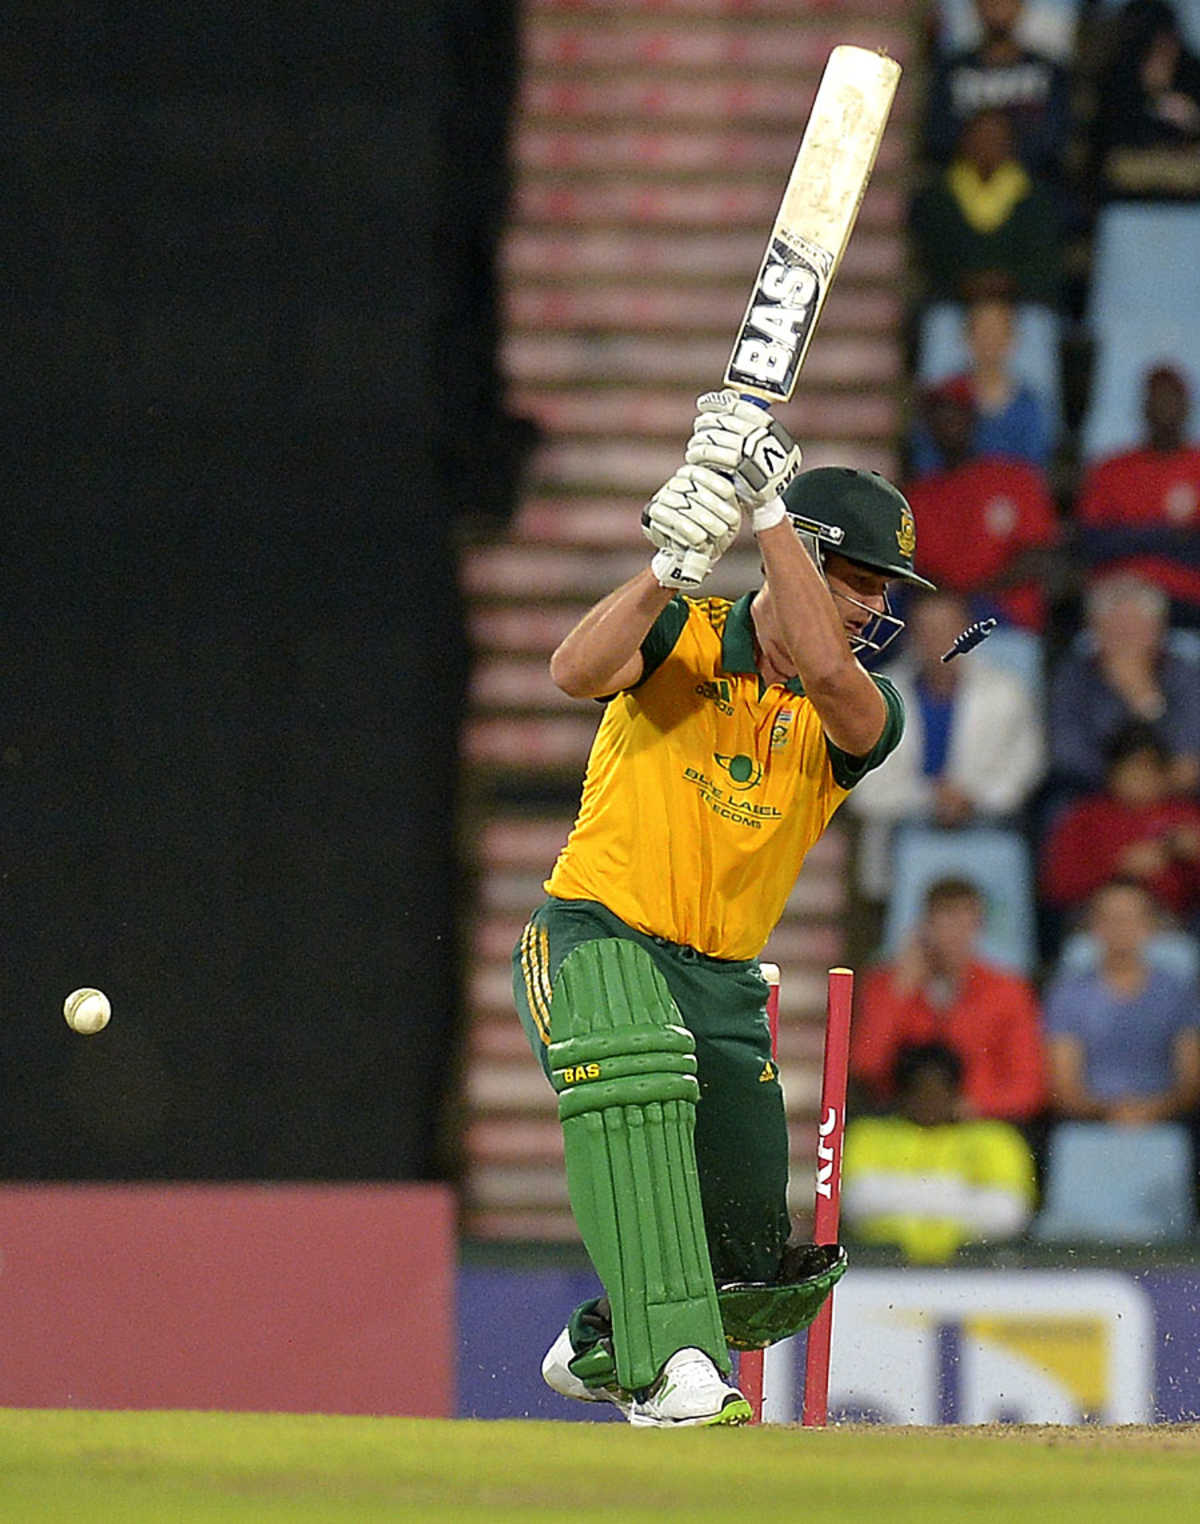 Albie Morkel ODI photo and editorial news picture from ESPNcricinfo Image